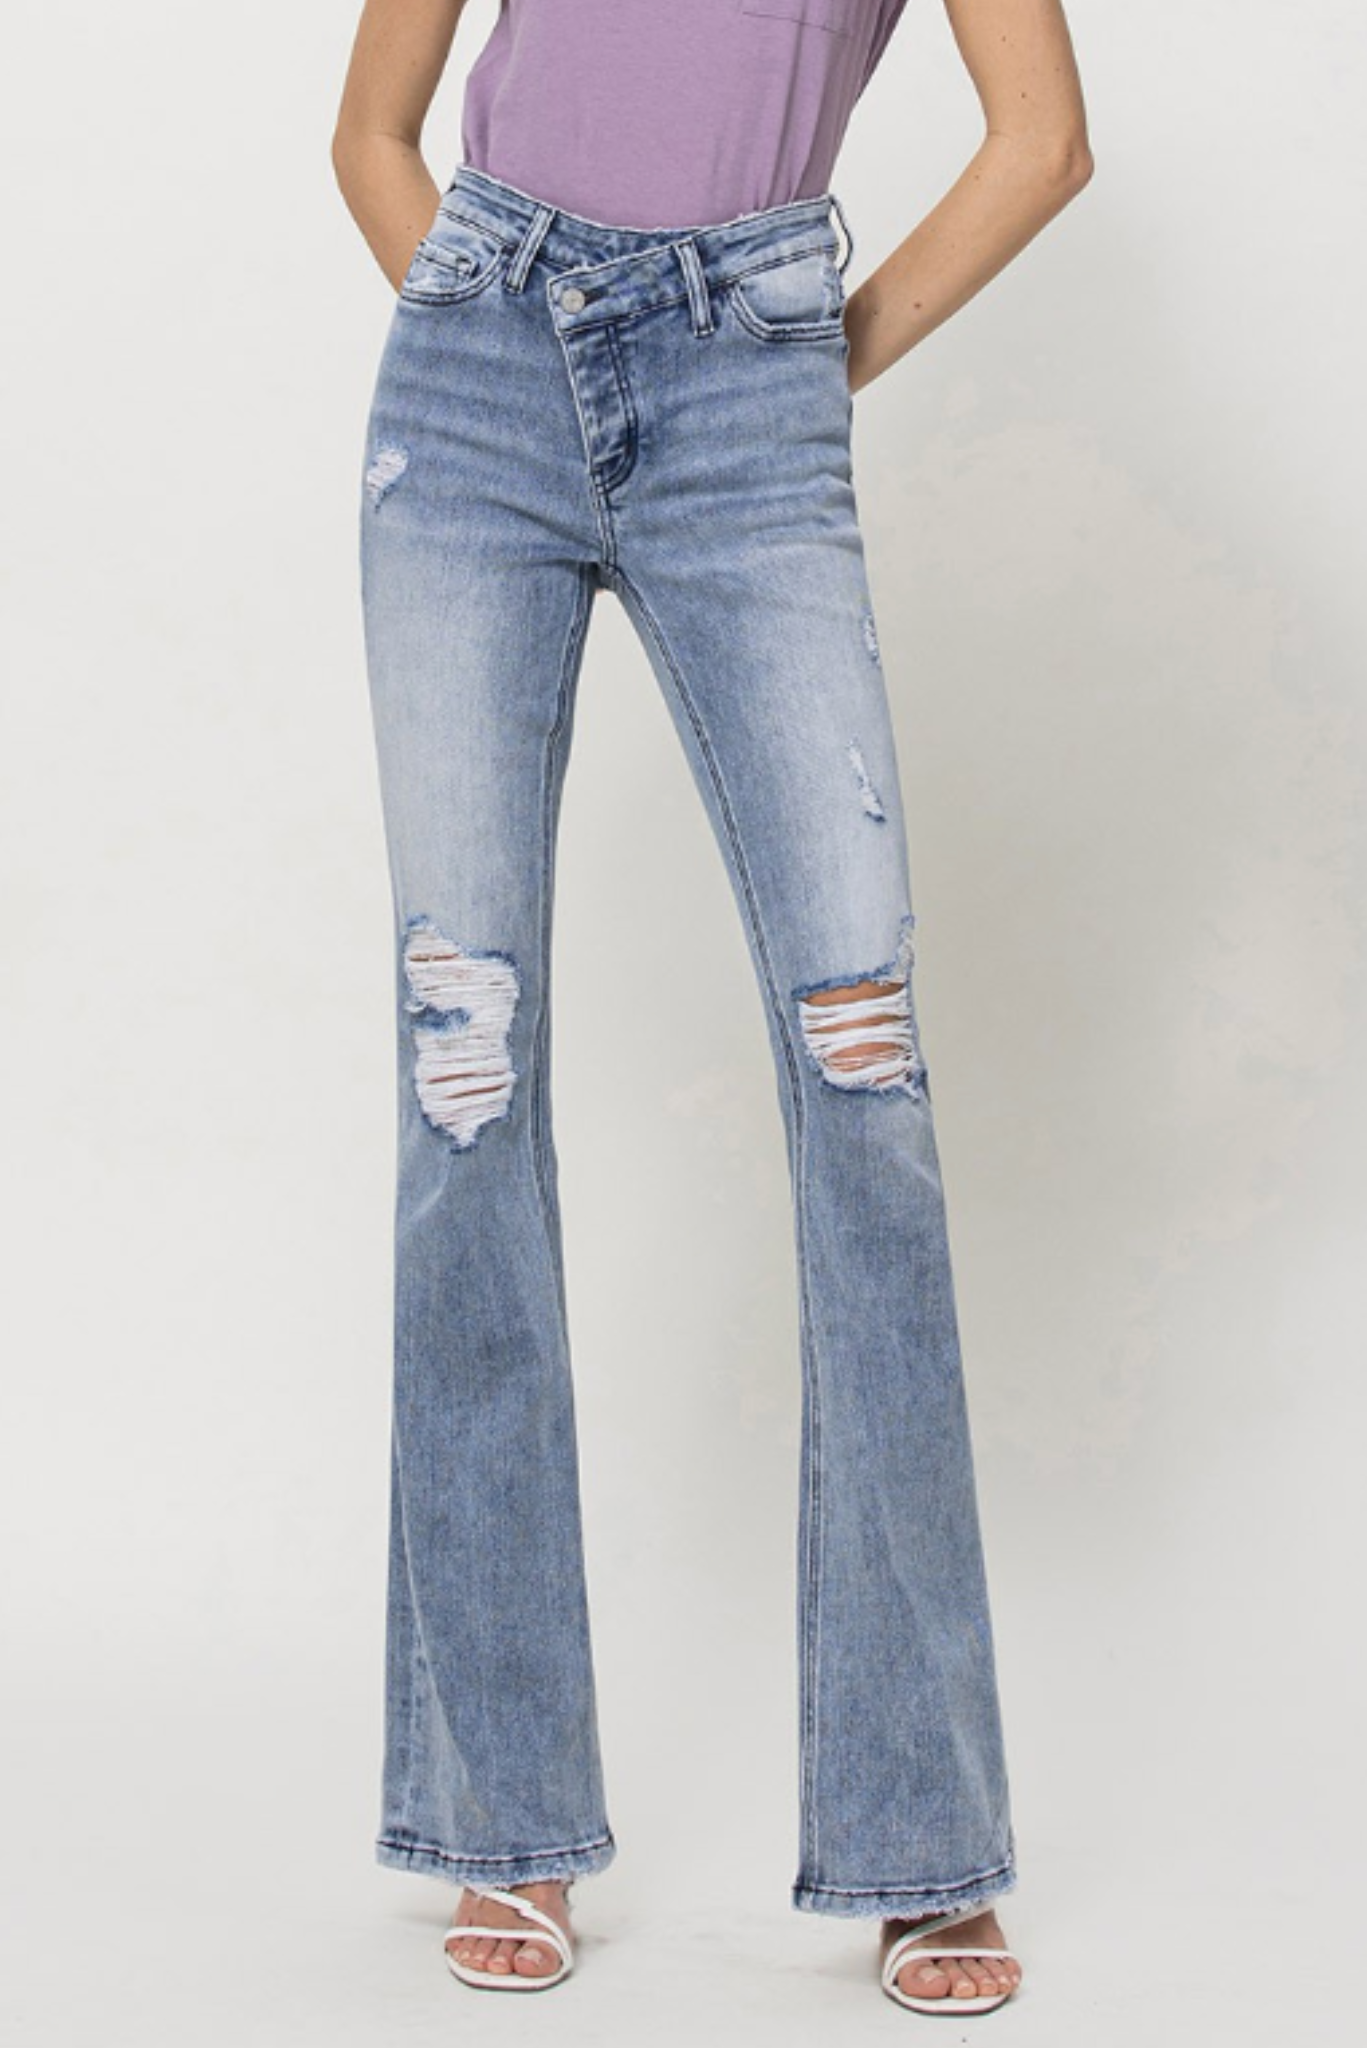 High Rise Acid Wash Criss Cross Distressed Flare Jeans, acid wash denim, jeans, flares, flare denim, distressed jeans, criss cross waist, Shop Style Your Senses By Mallory Fitzsimmons